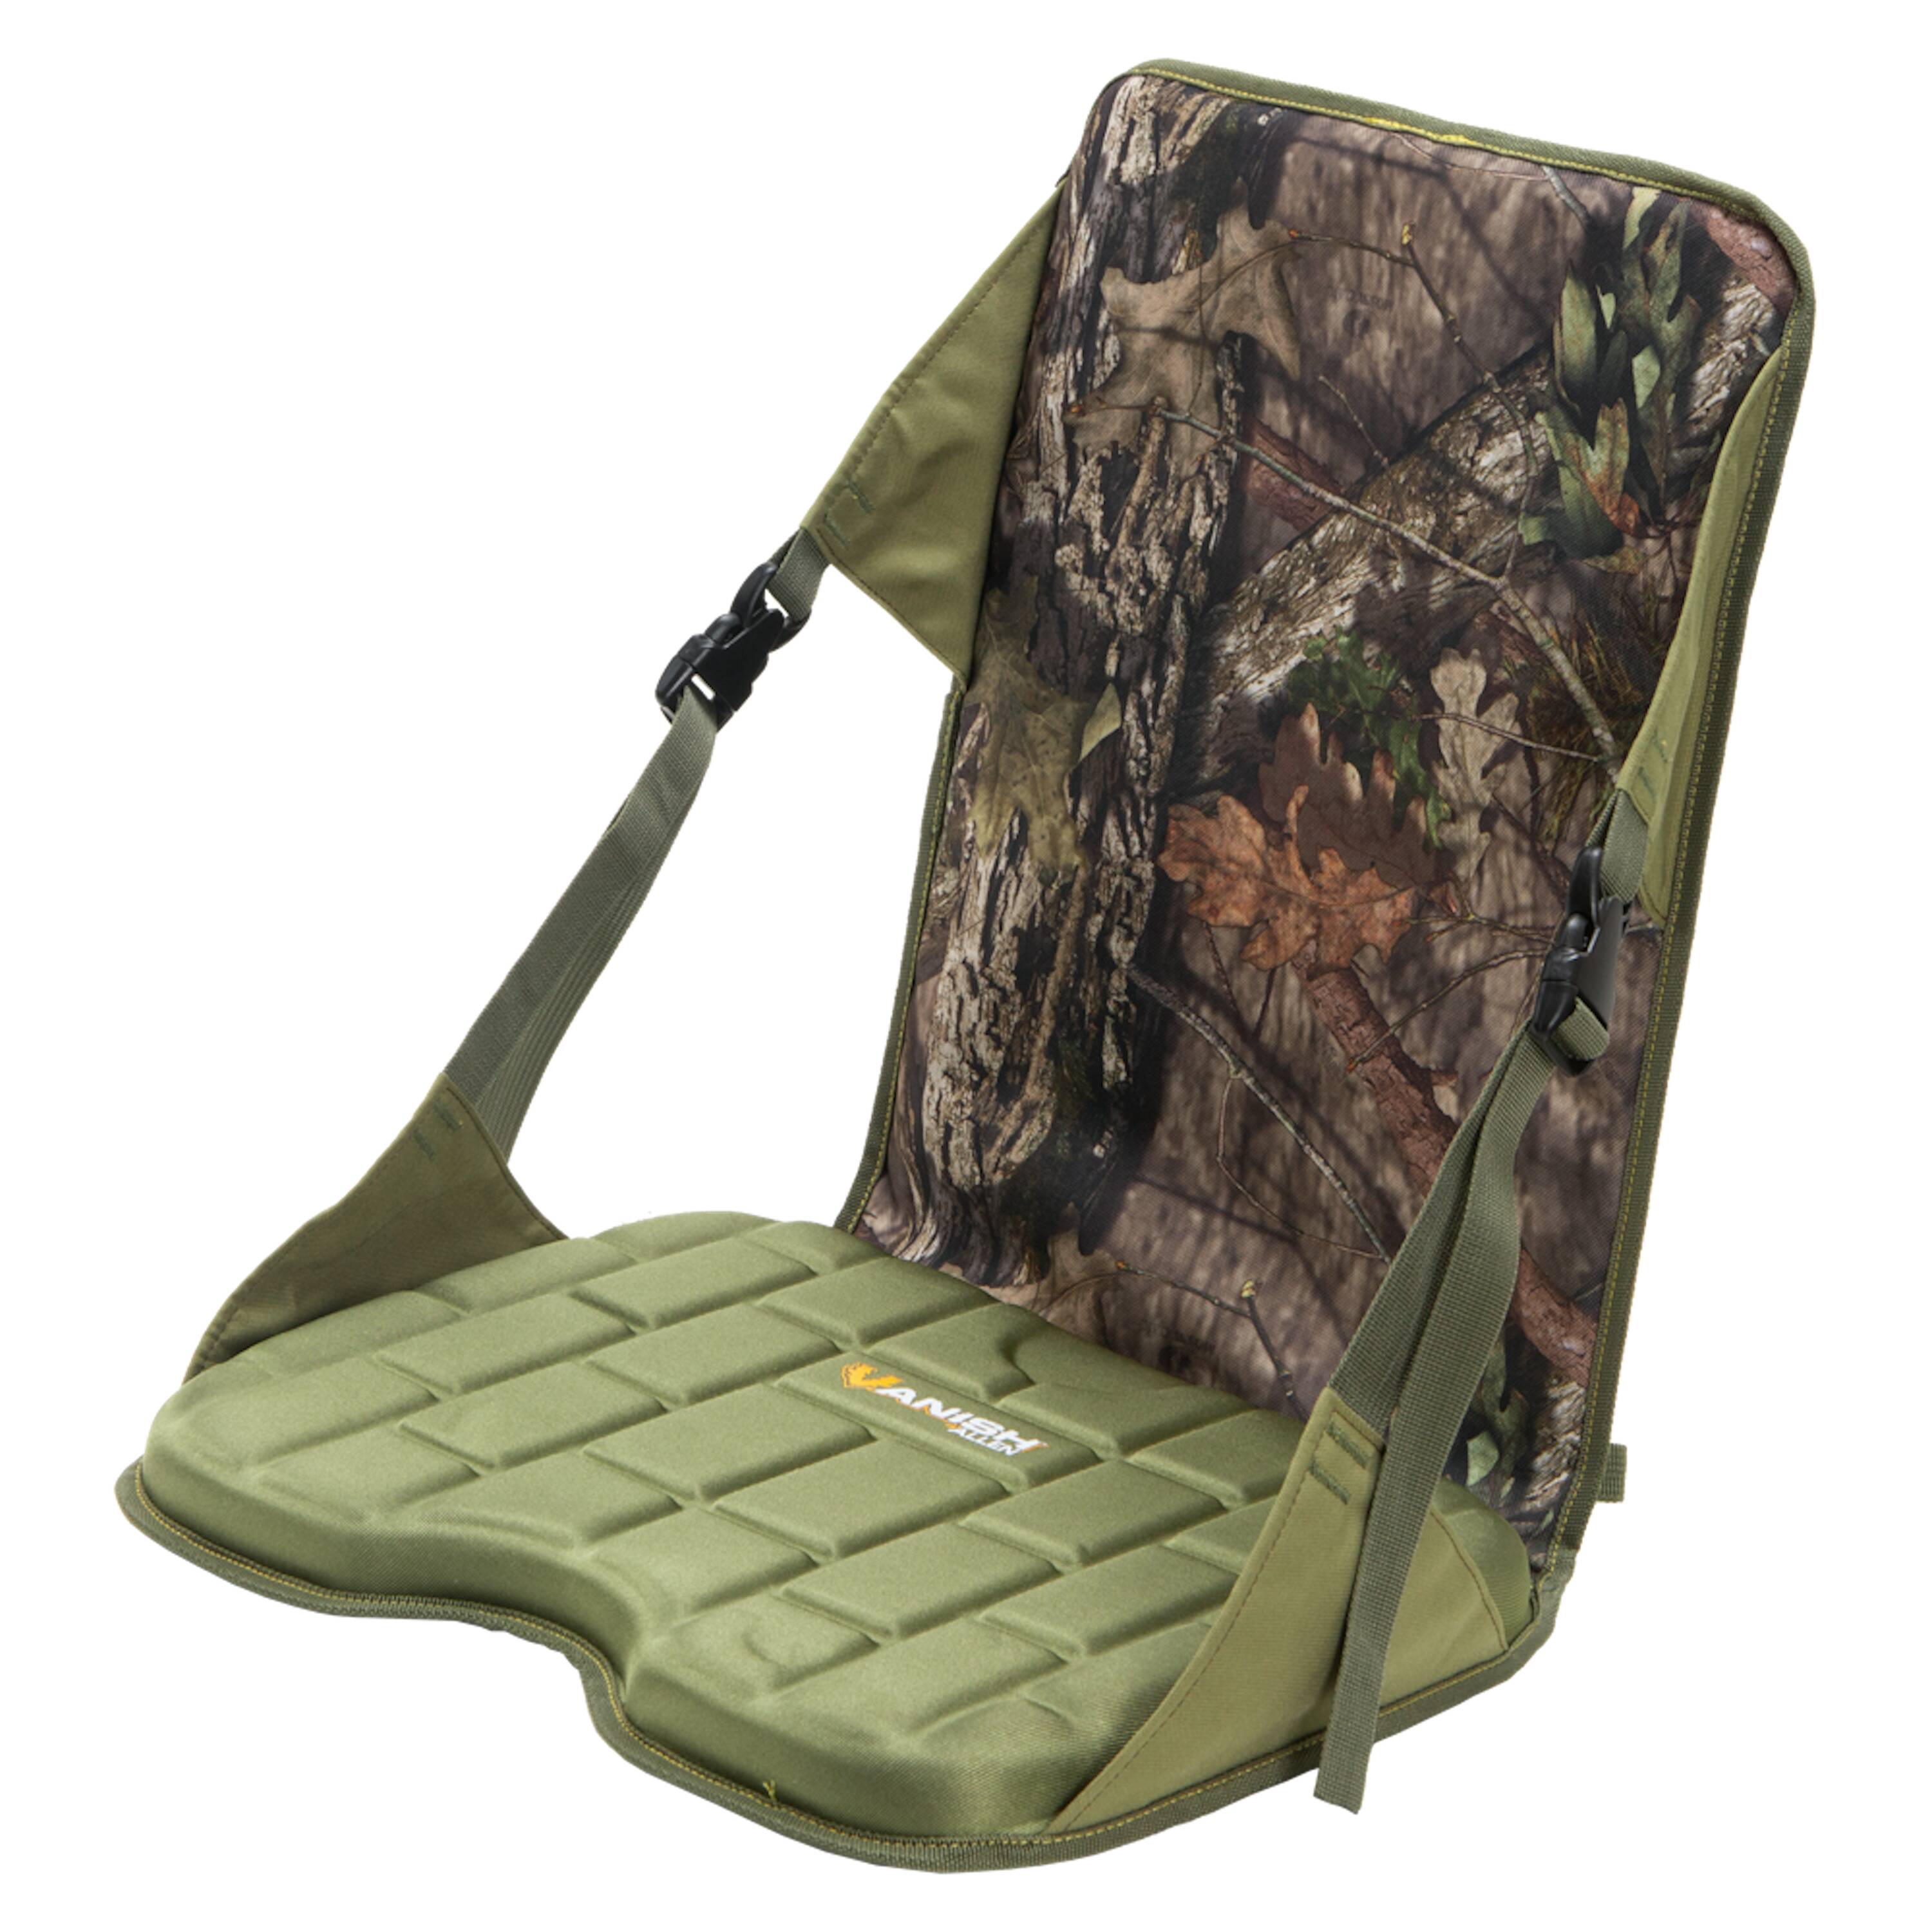  HME Durable Portable Compact Comfortable Weather-Resistant  Versatile Hunting Folding Seat Foam Cushion with Adjustable Straps and  Storage Pocket : Sports & Outdoors